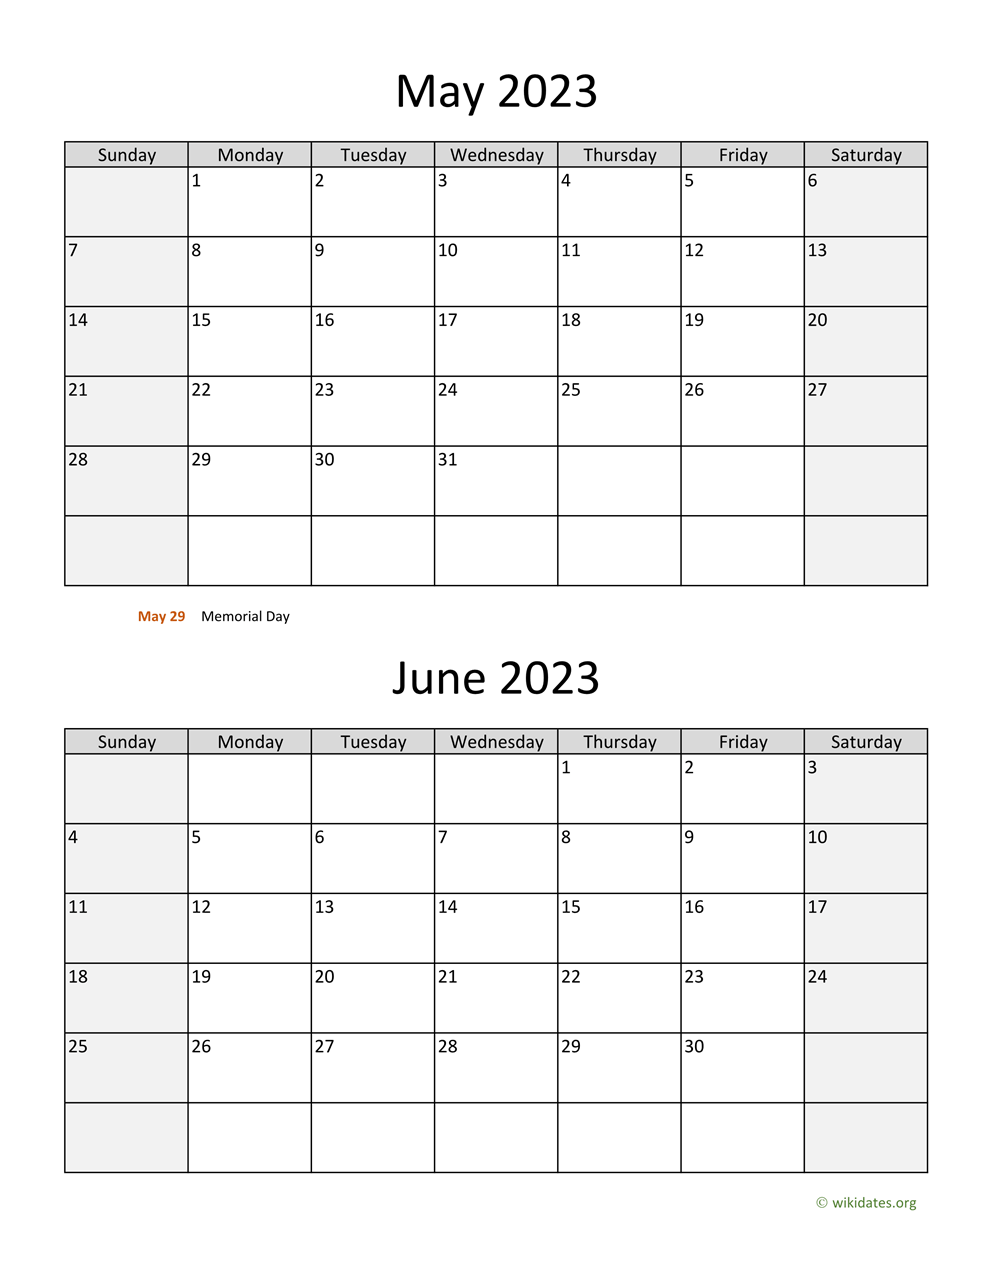 printable-calendar-may-and-june-2023-get-your-hands-on-amazing-free-printables